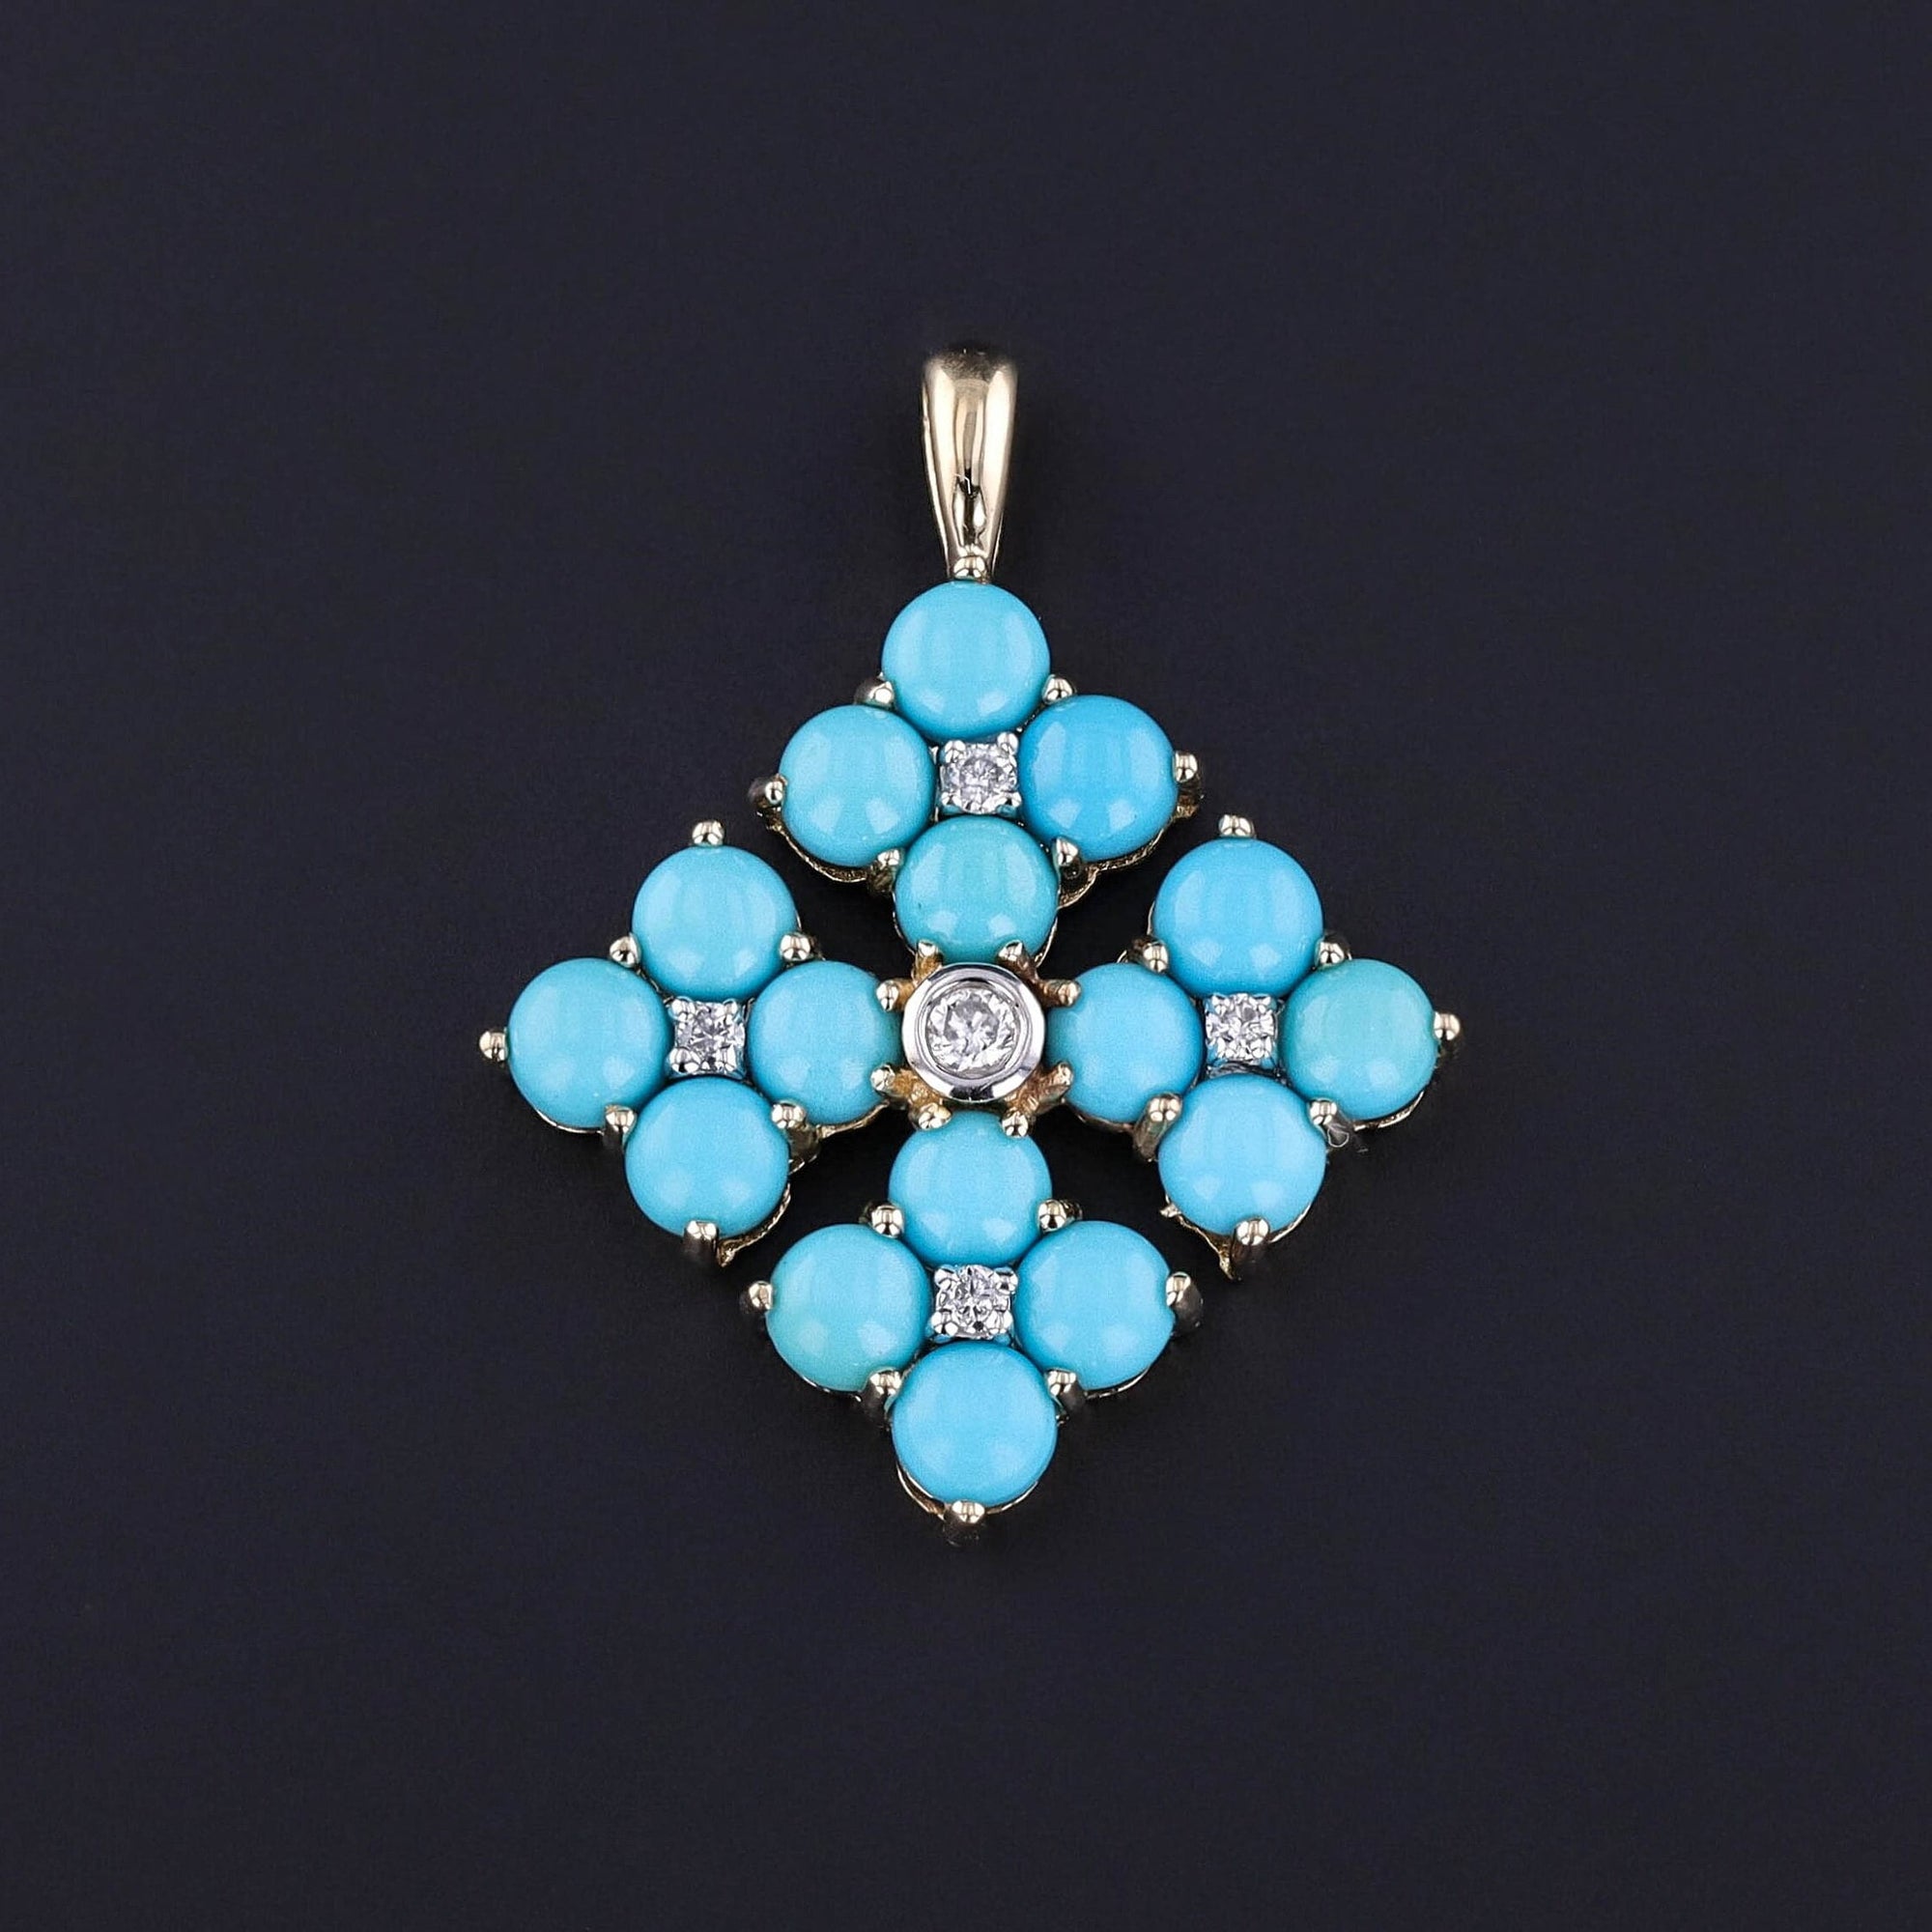 Vintage Turquoise and Diamond Pendant of 14k Gold